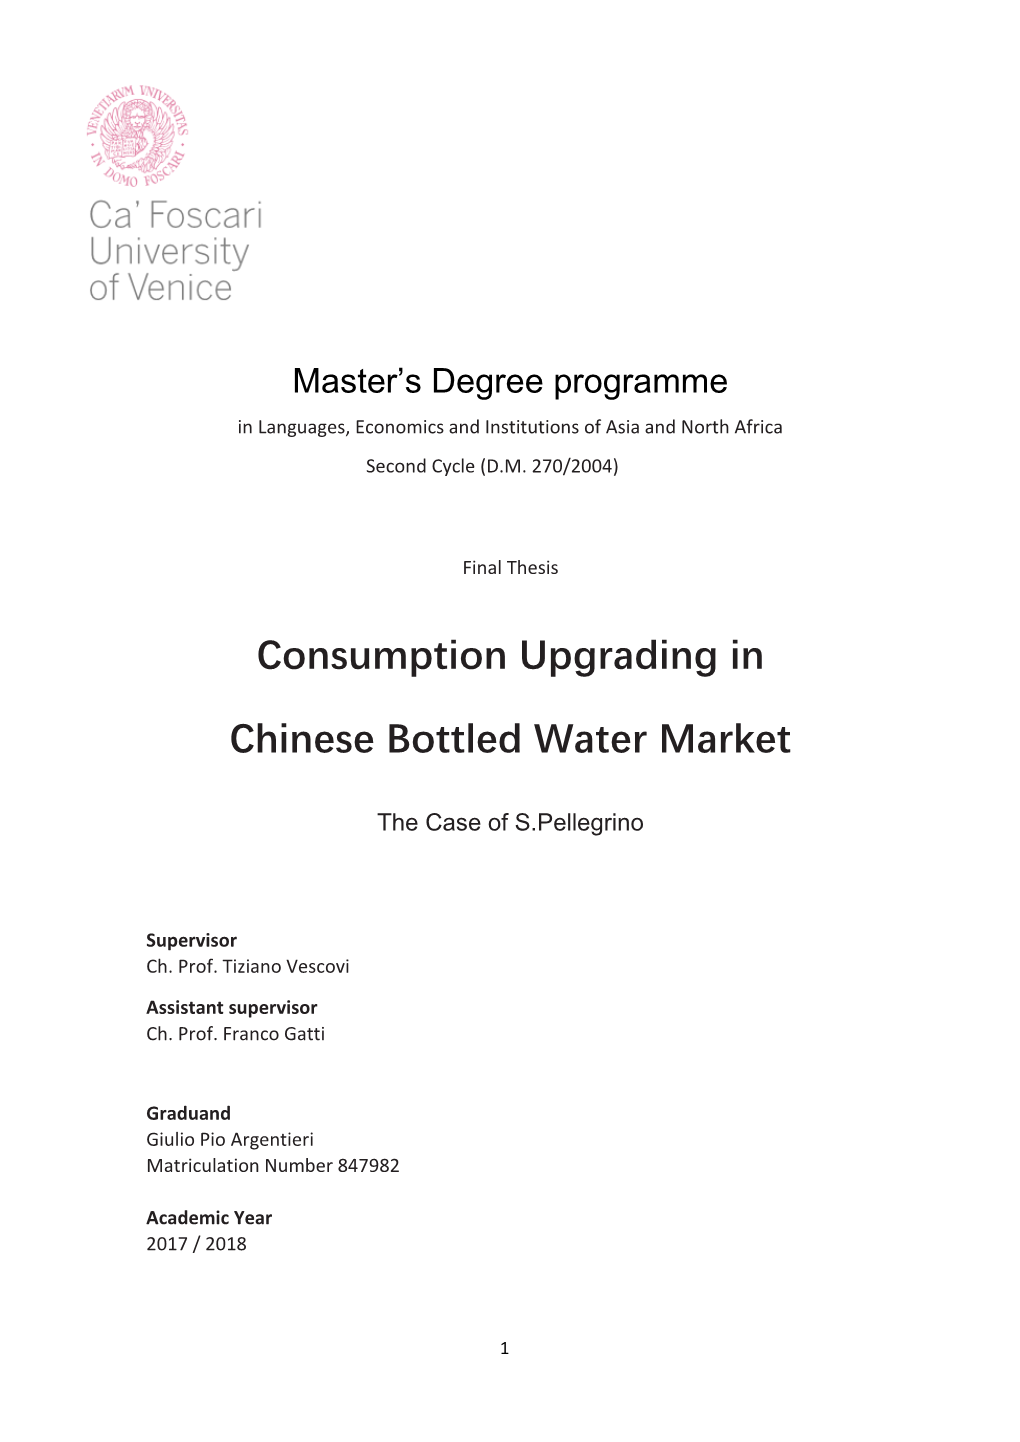 Consumption Upgrading in Chinese Bottled Water Market